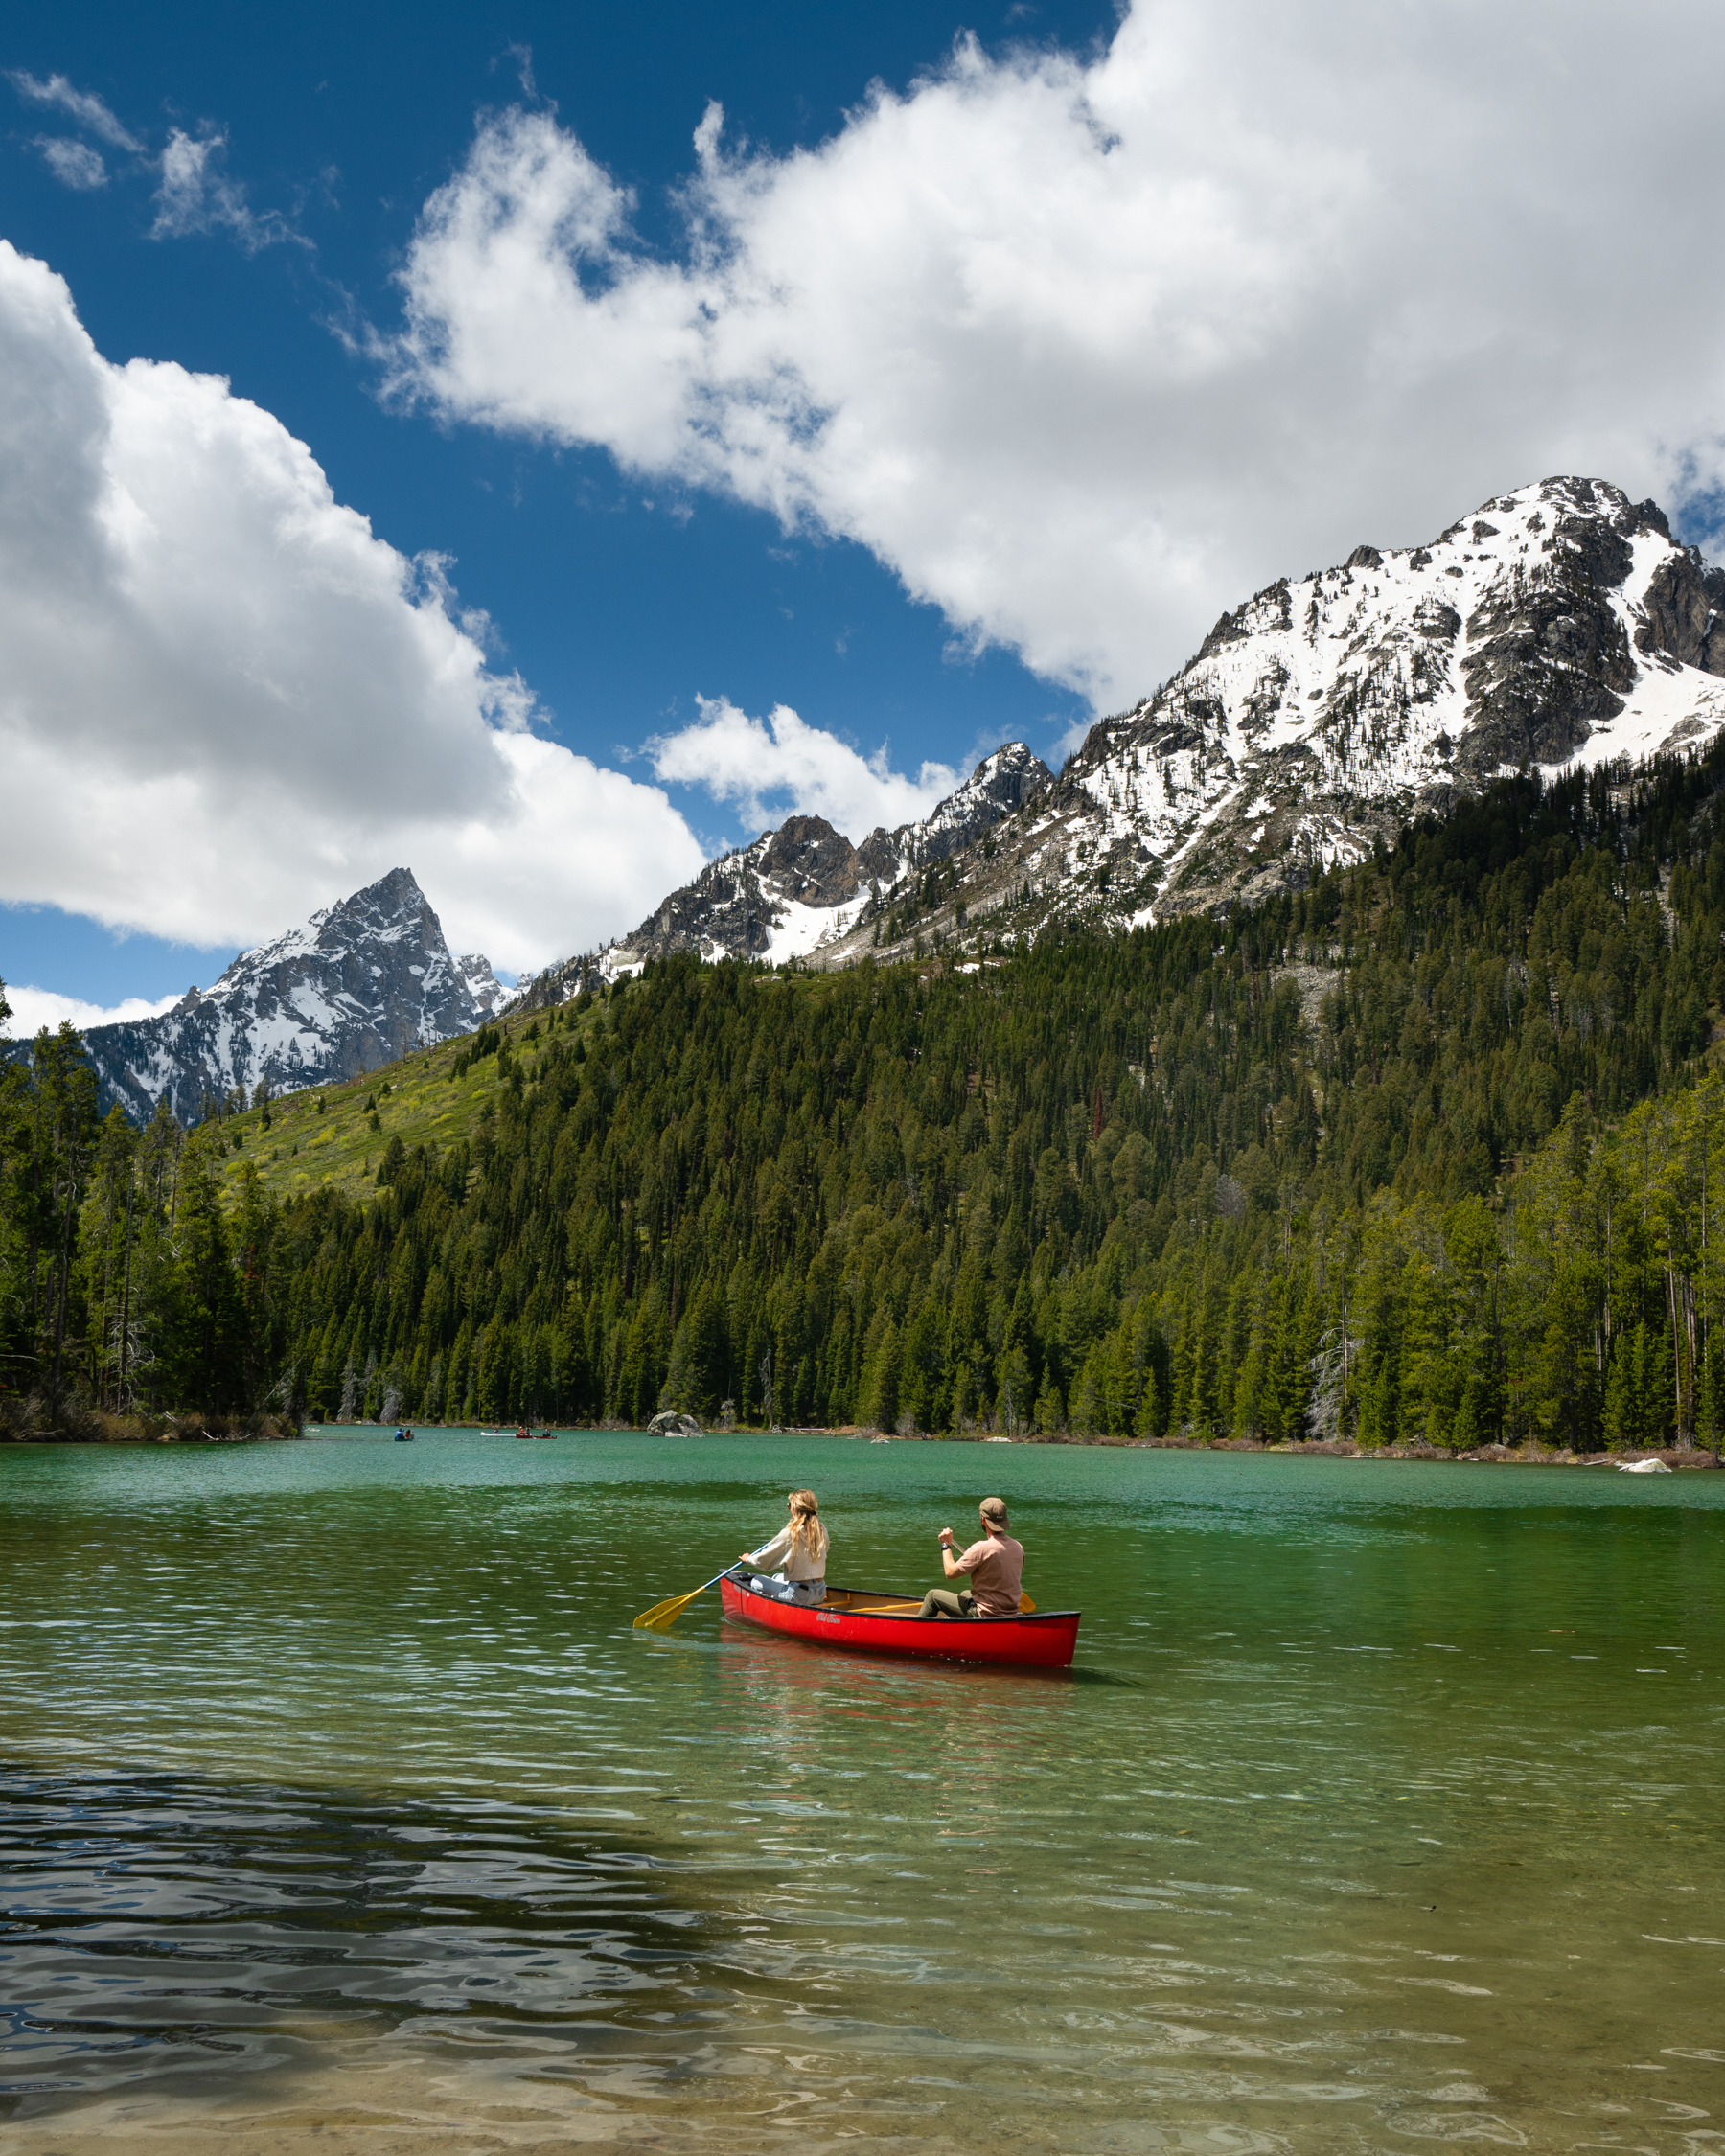 The guy and girl sail a red boat with a scenic view of green trees and snowy mountain peaks.